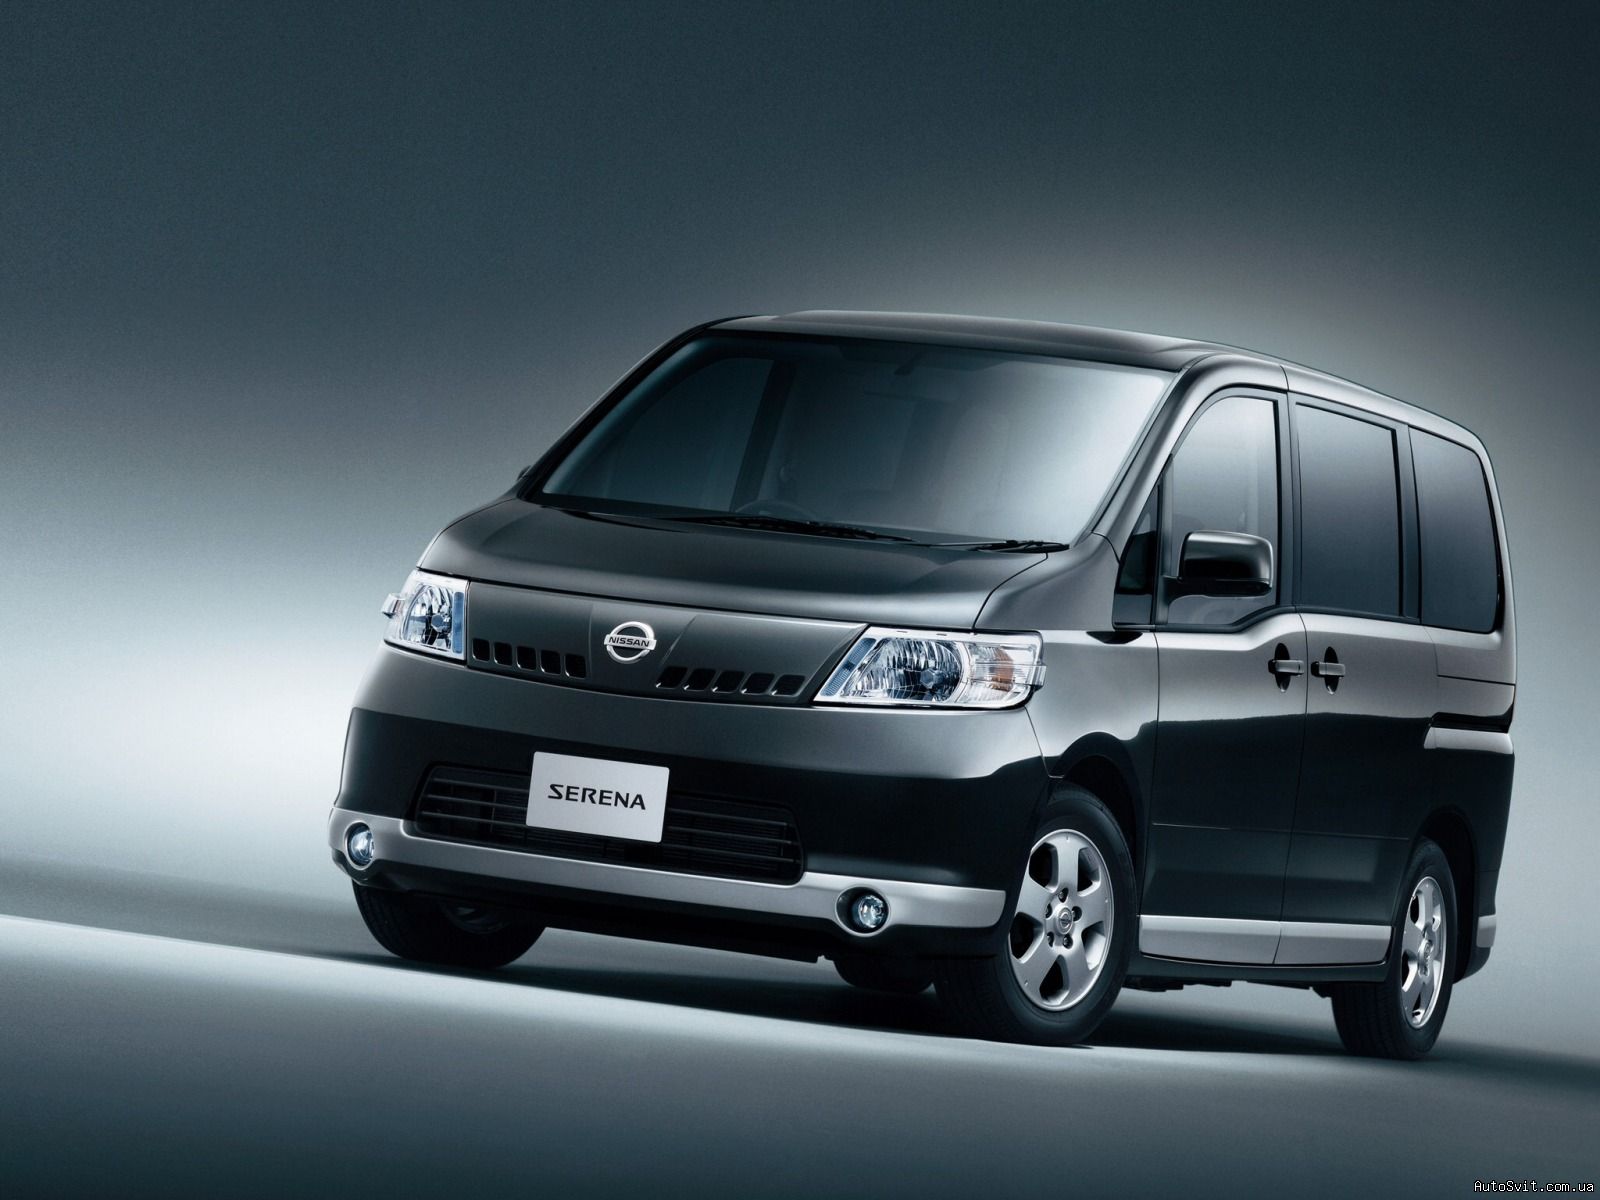 Nissan Serena 2006 Review, Amazing Pictures and Images